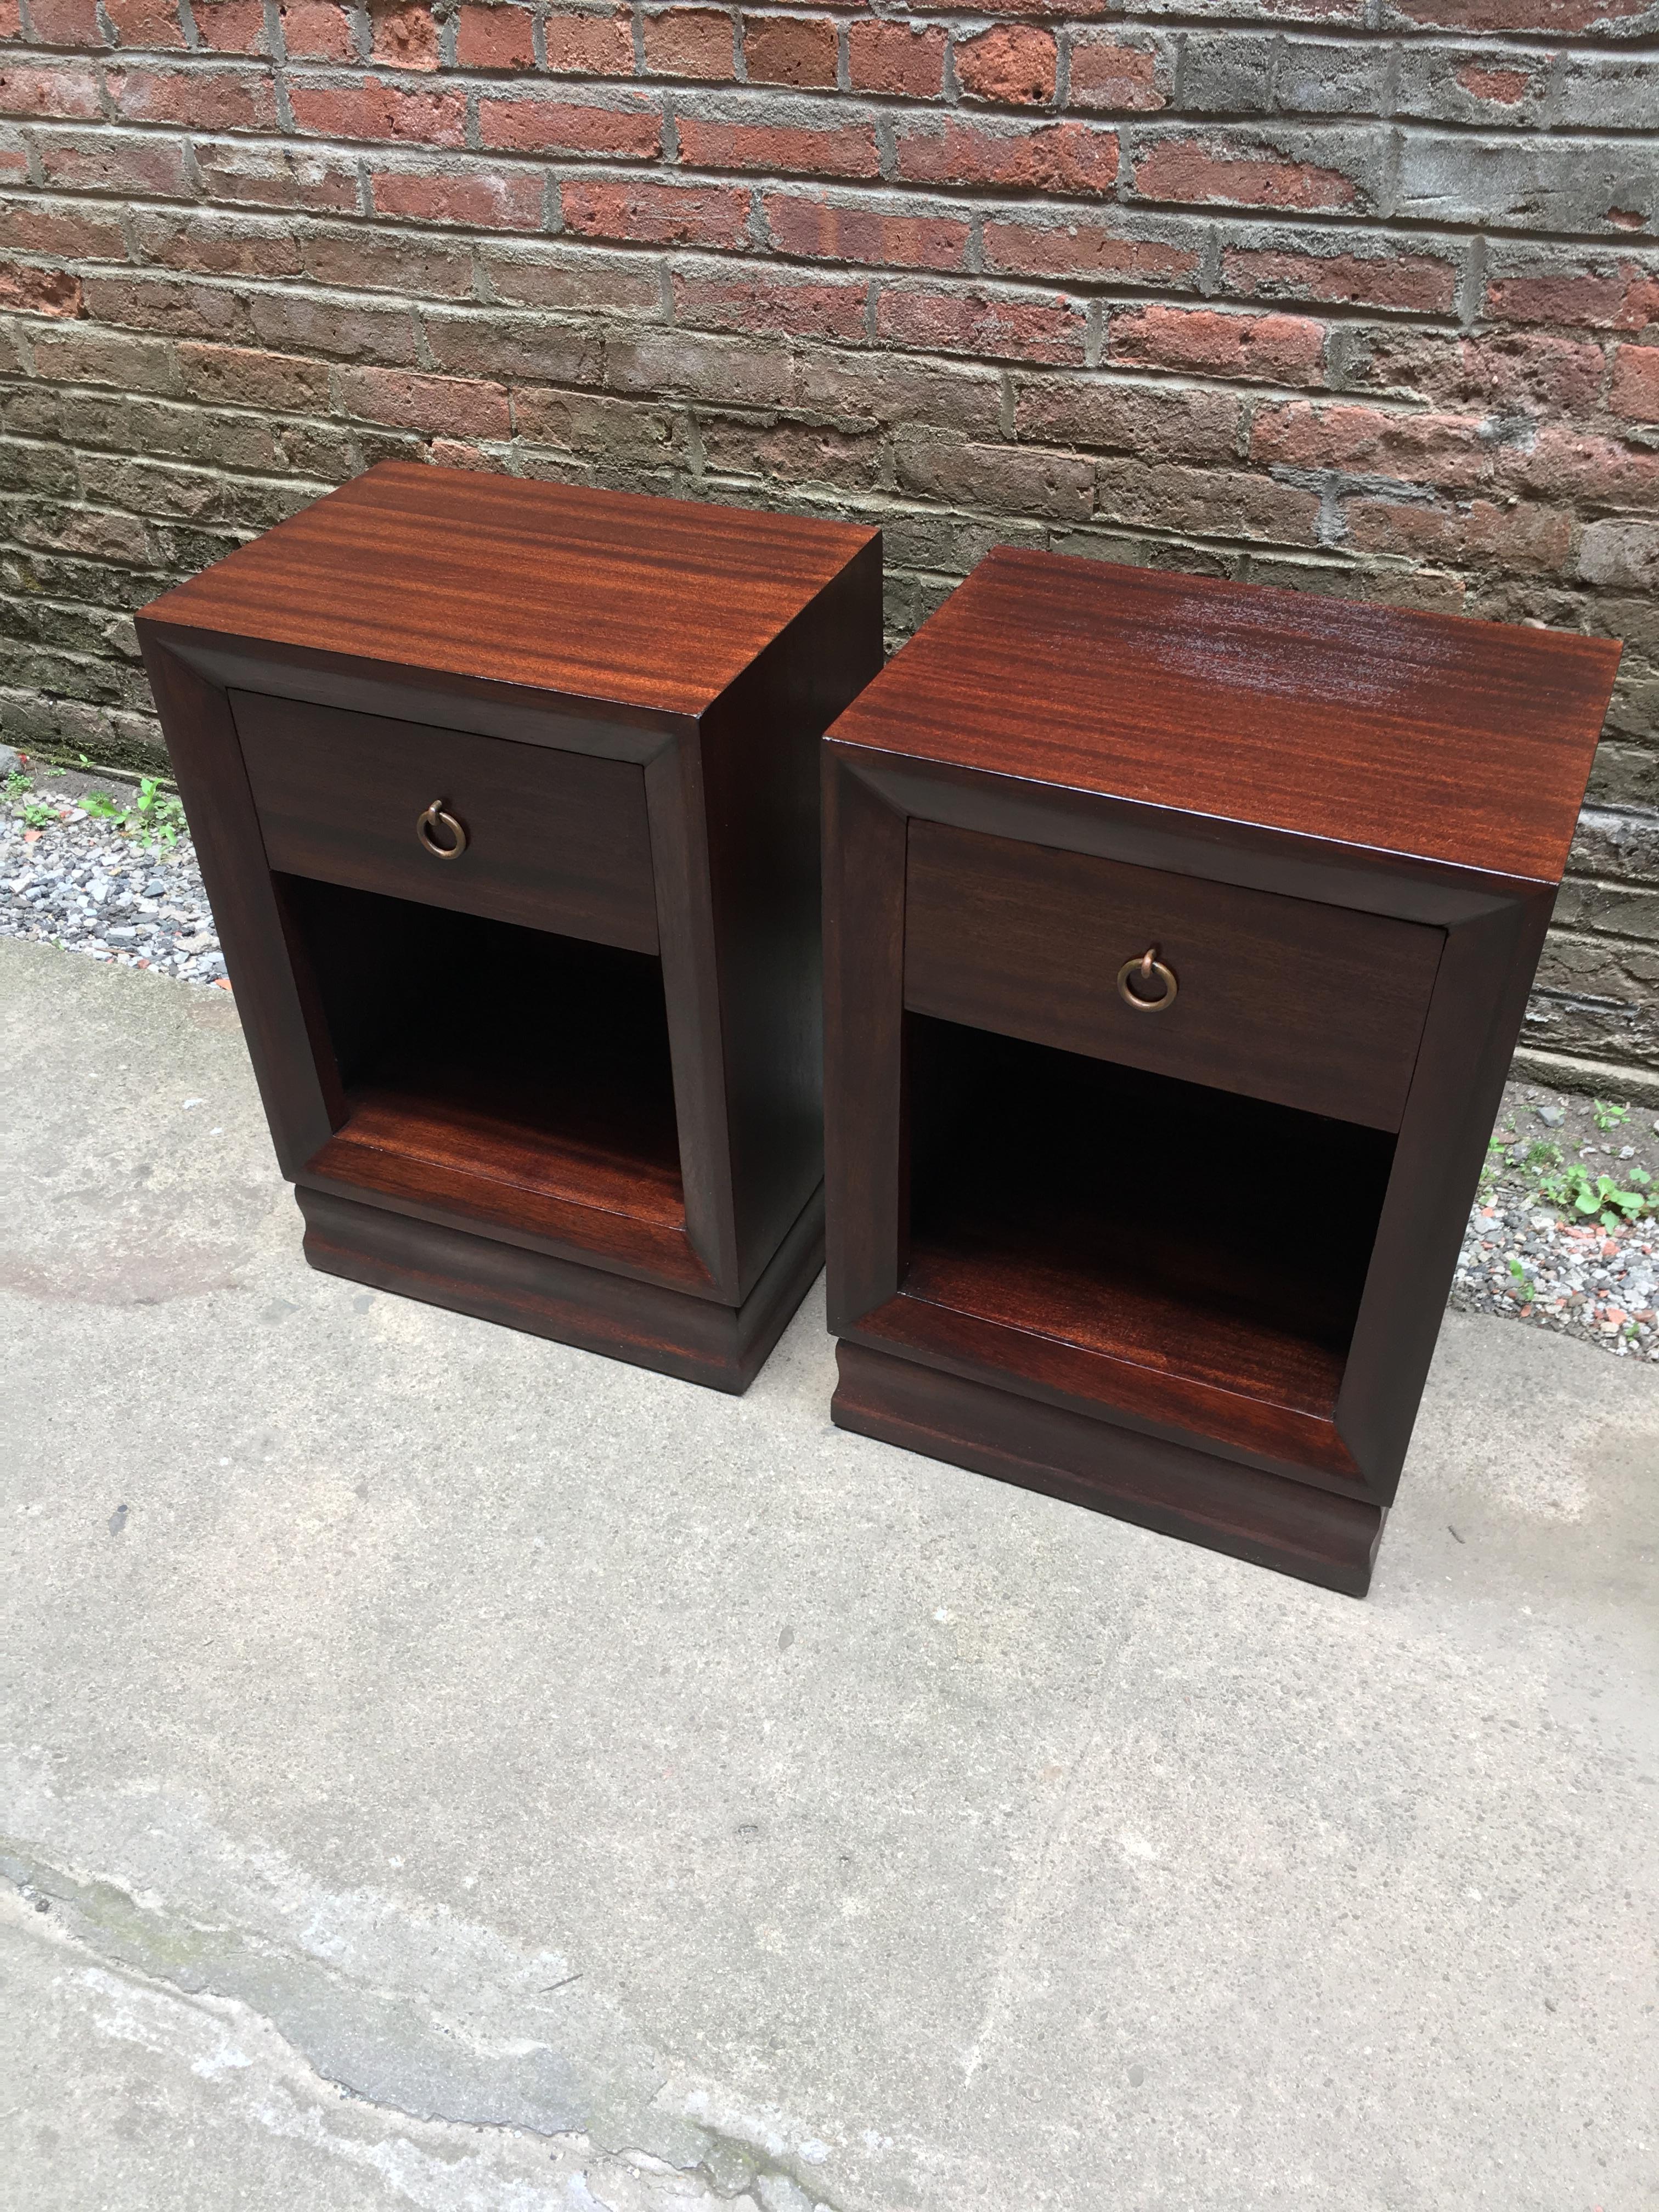 Excellent pair of mahogany with bronze ring pull end tables. The end tables feature solid bronze ring pulls, shaped plinth bases, figured mahogany veneers and bevel edge fronts. Signed in the drawer with a burn in mark, Decorator's Row Creation,